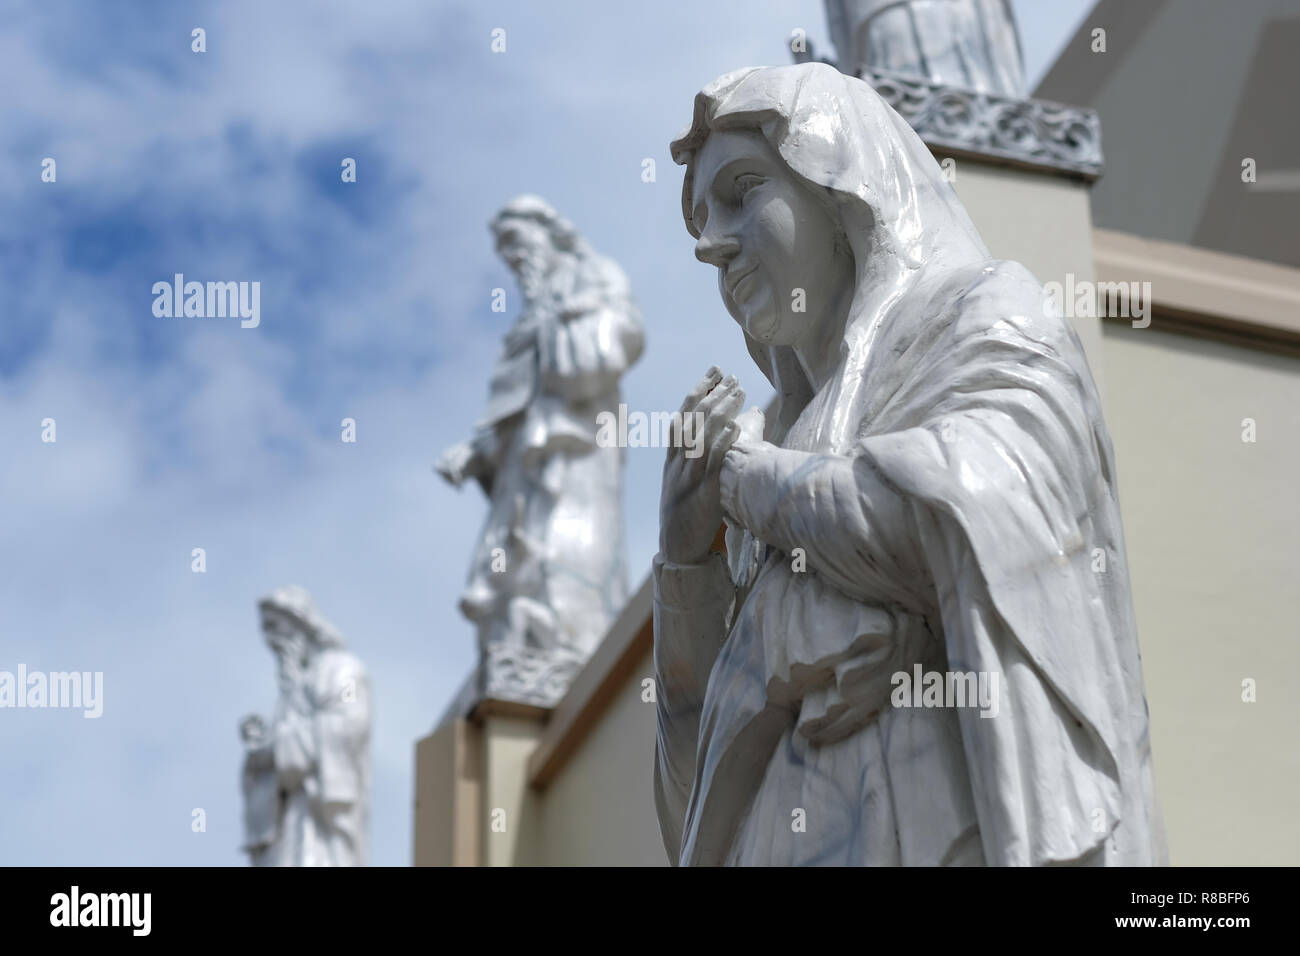 Sculpted religious figures decorating facade of the Roman Catholic Antipolo Cathedral or National Shrine of Our Lady of Peace and Good Voyage located in the city of Antipolo, in the province of Rizal in the Philippines. Stock Photo